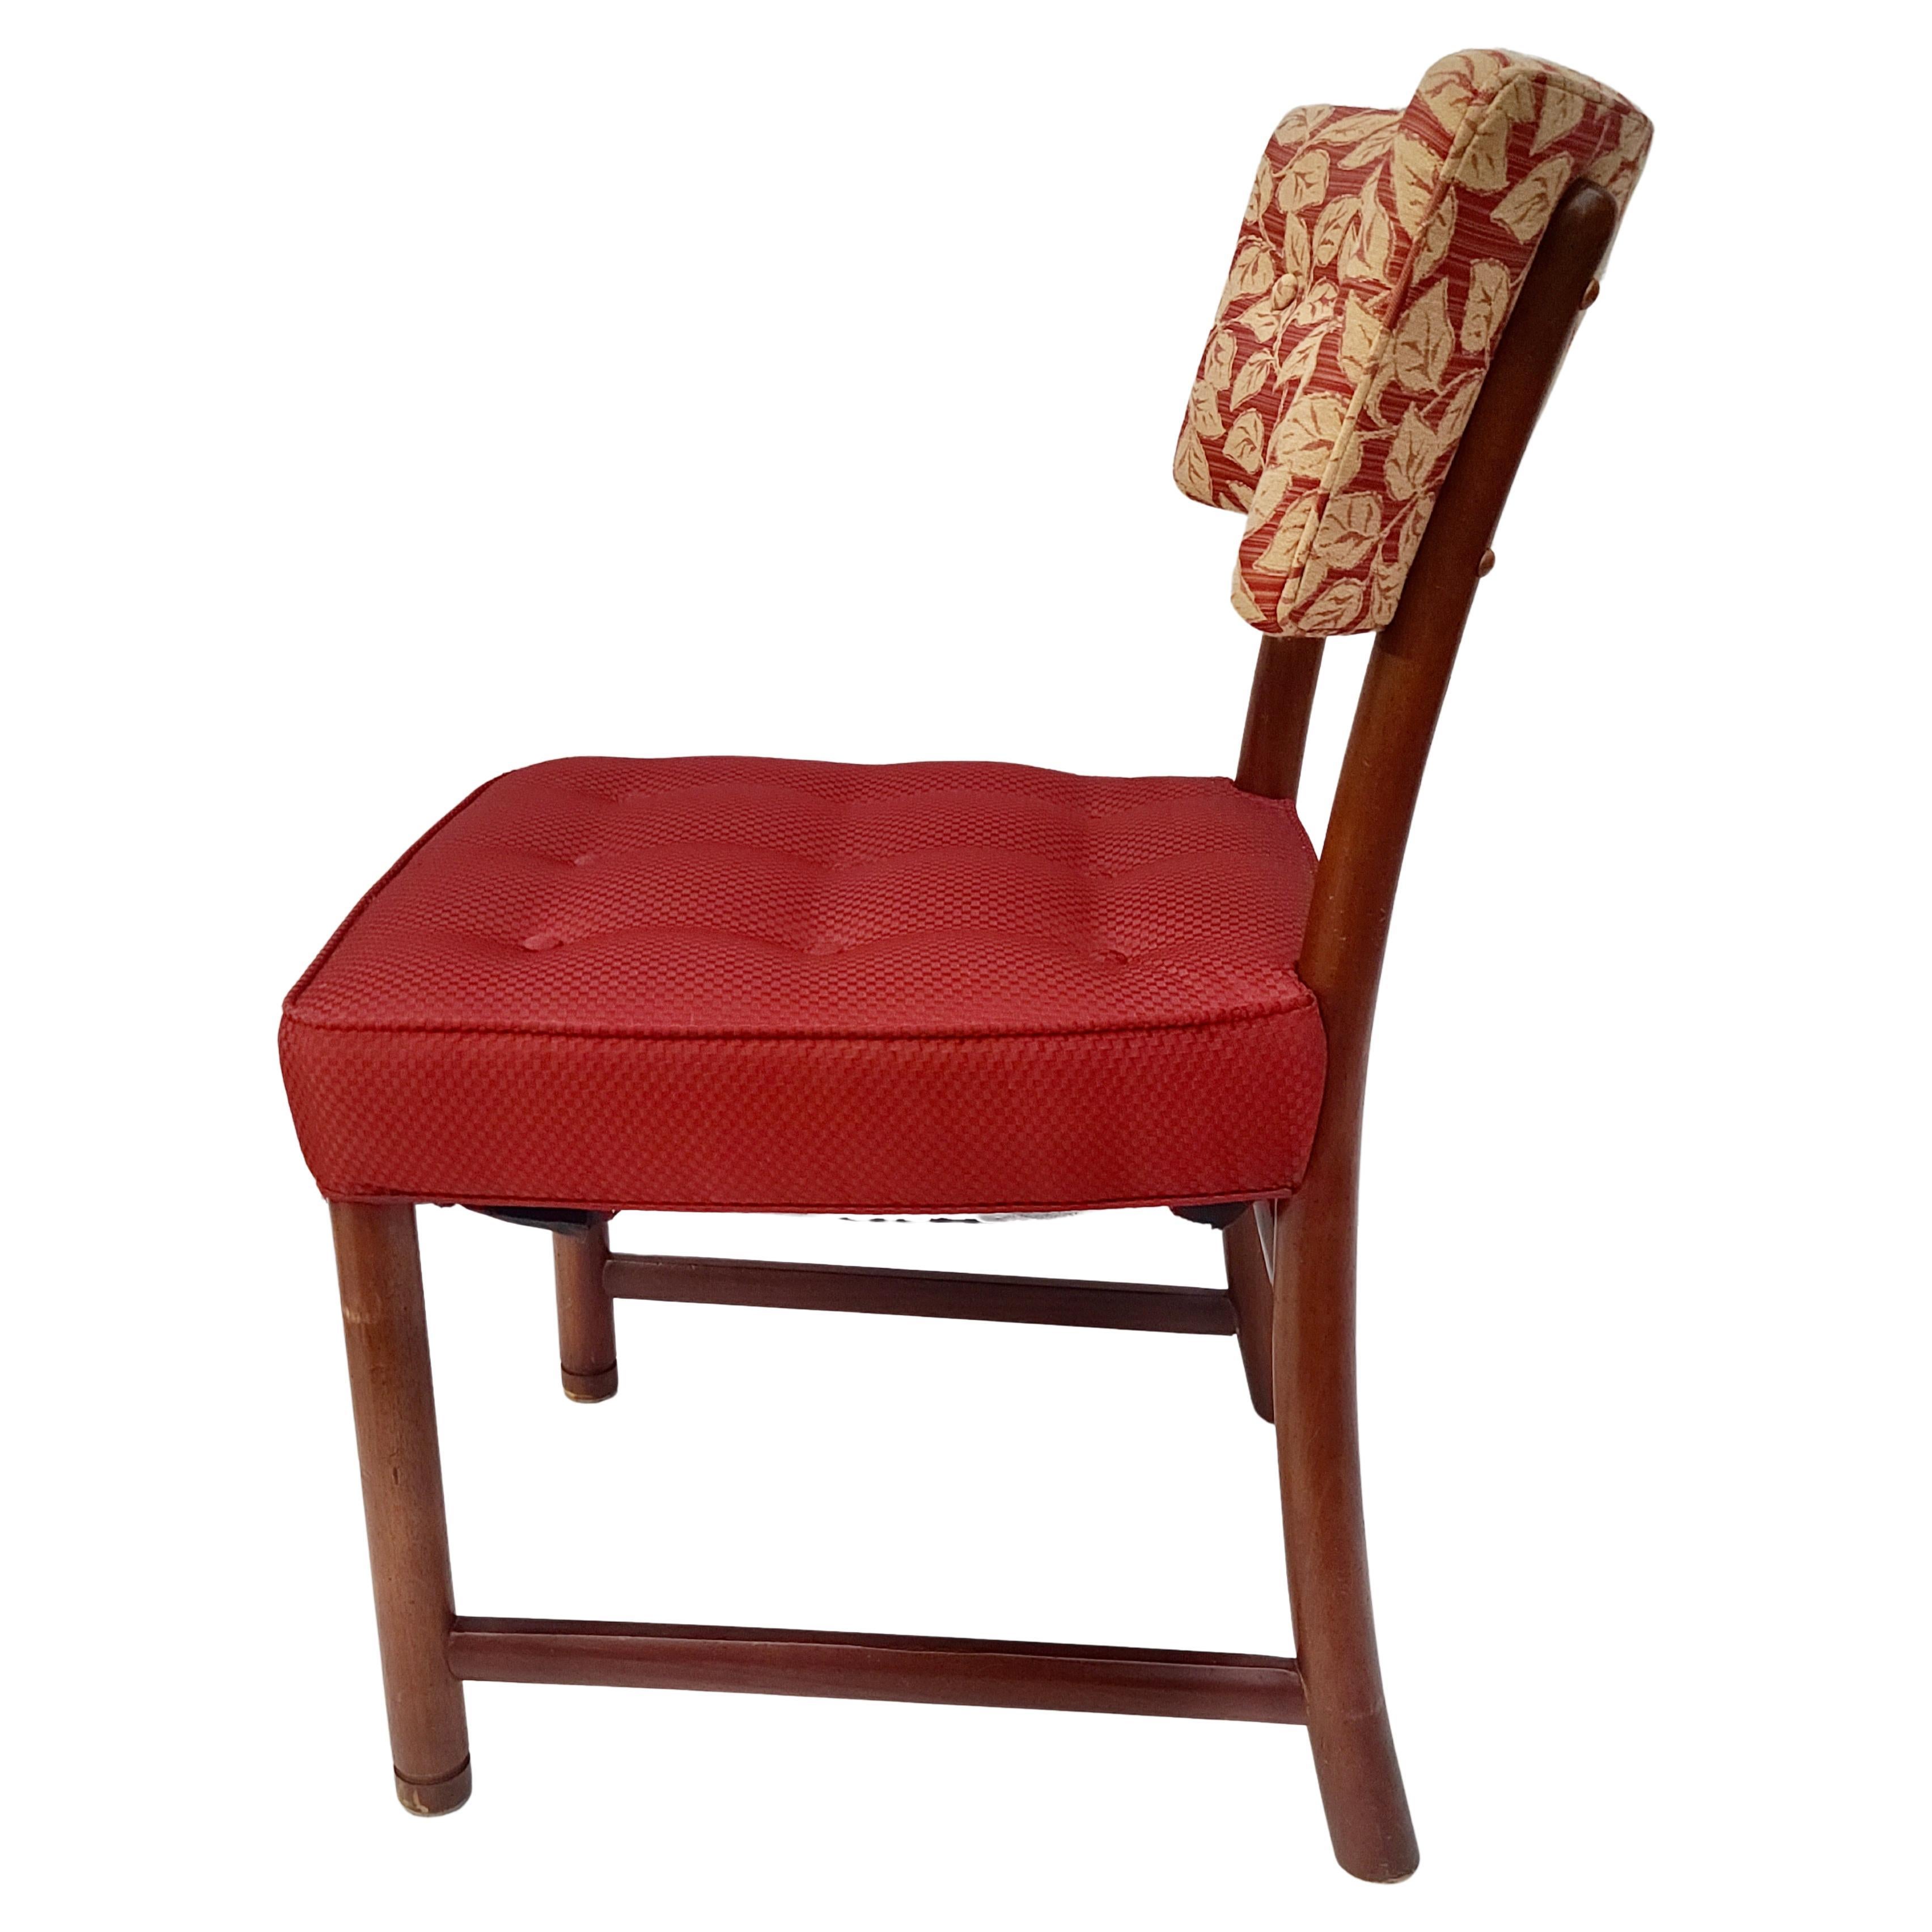 Rare Edward Wormley for Dunbar Saber Leg Dining Chair In Good Condition For Sale In Fraser, MI